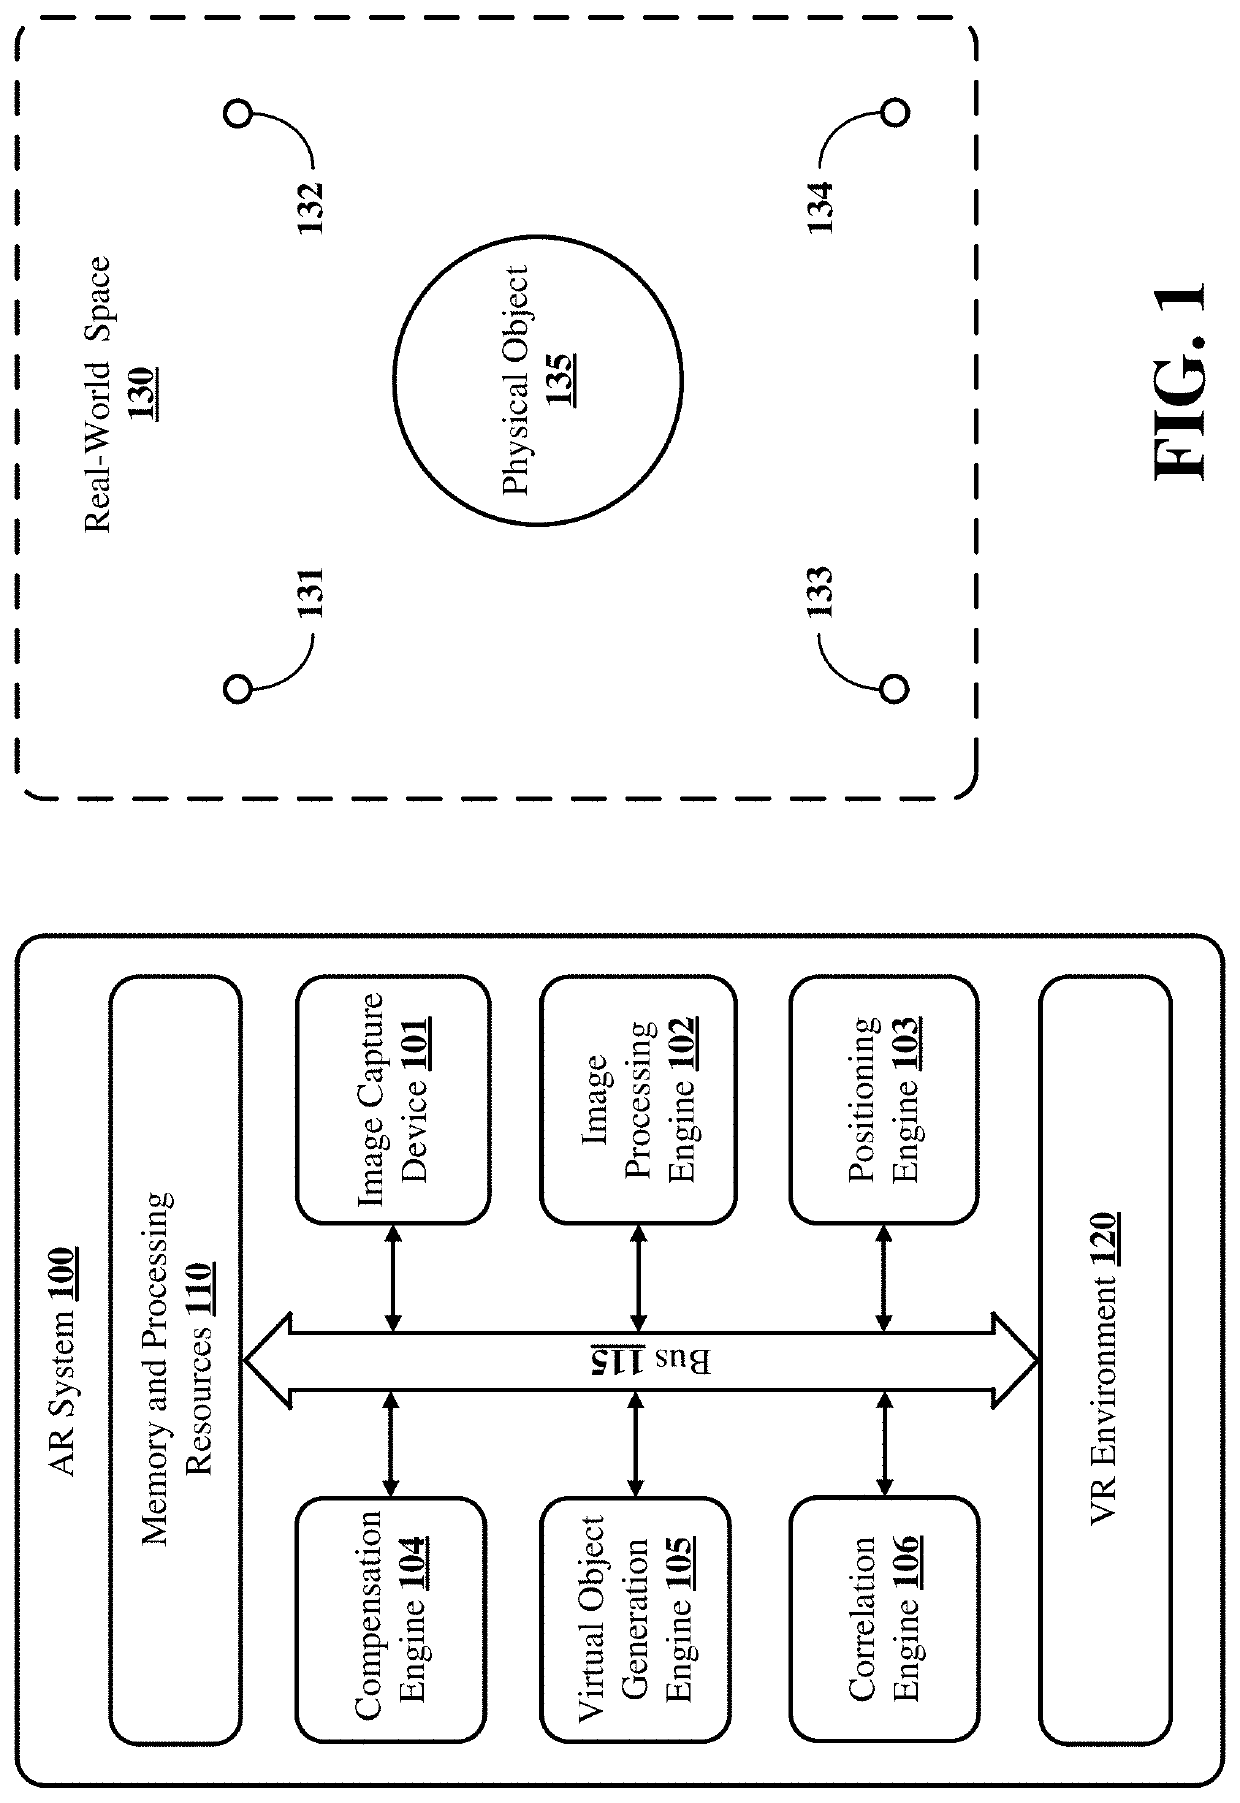 Methods and systems to create a controller in an augmented reality (AR) environment using any physical object